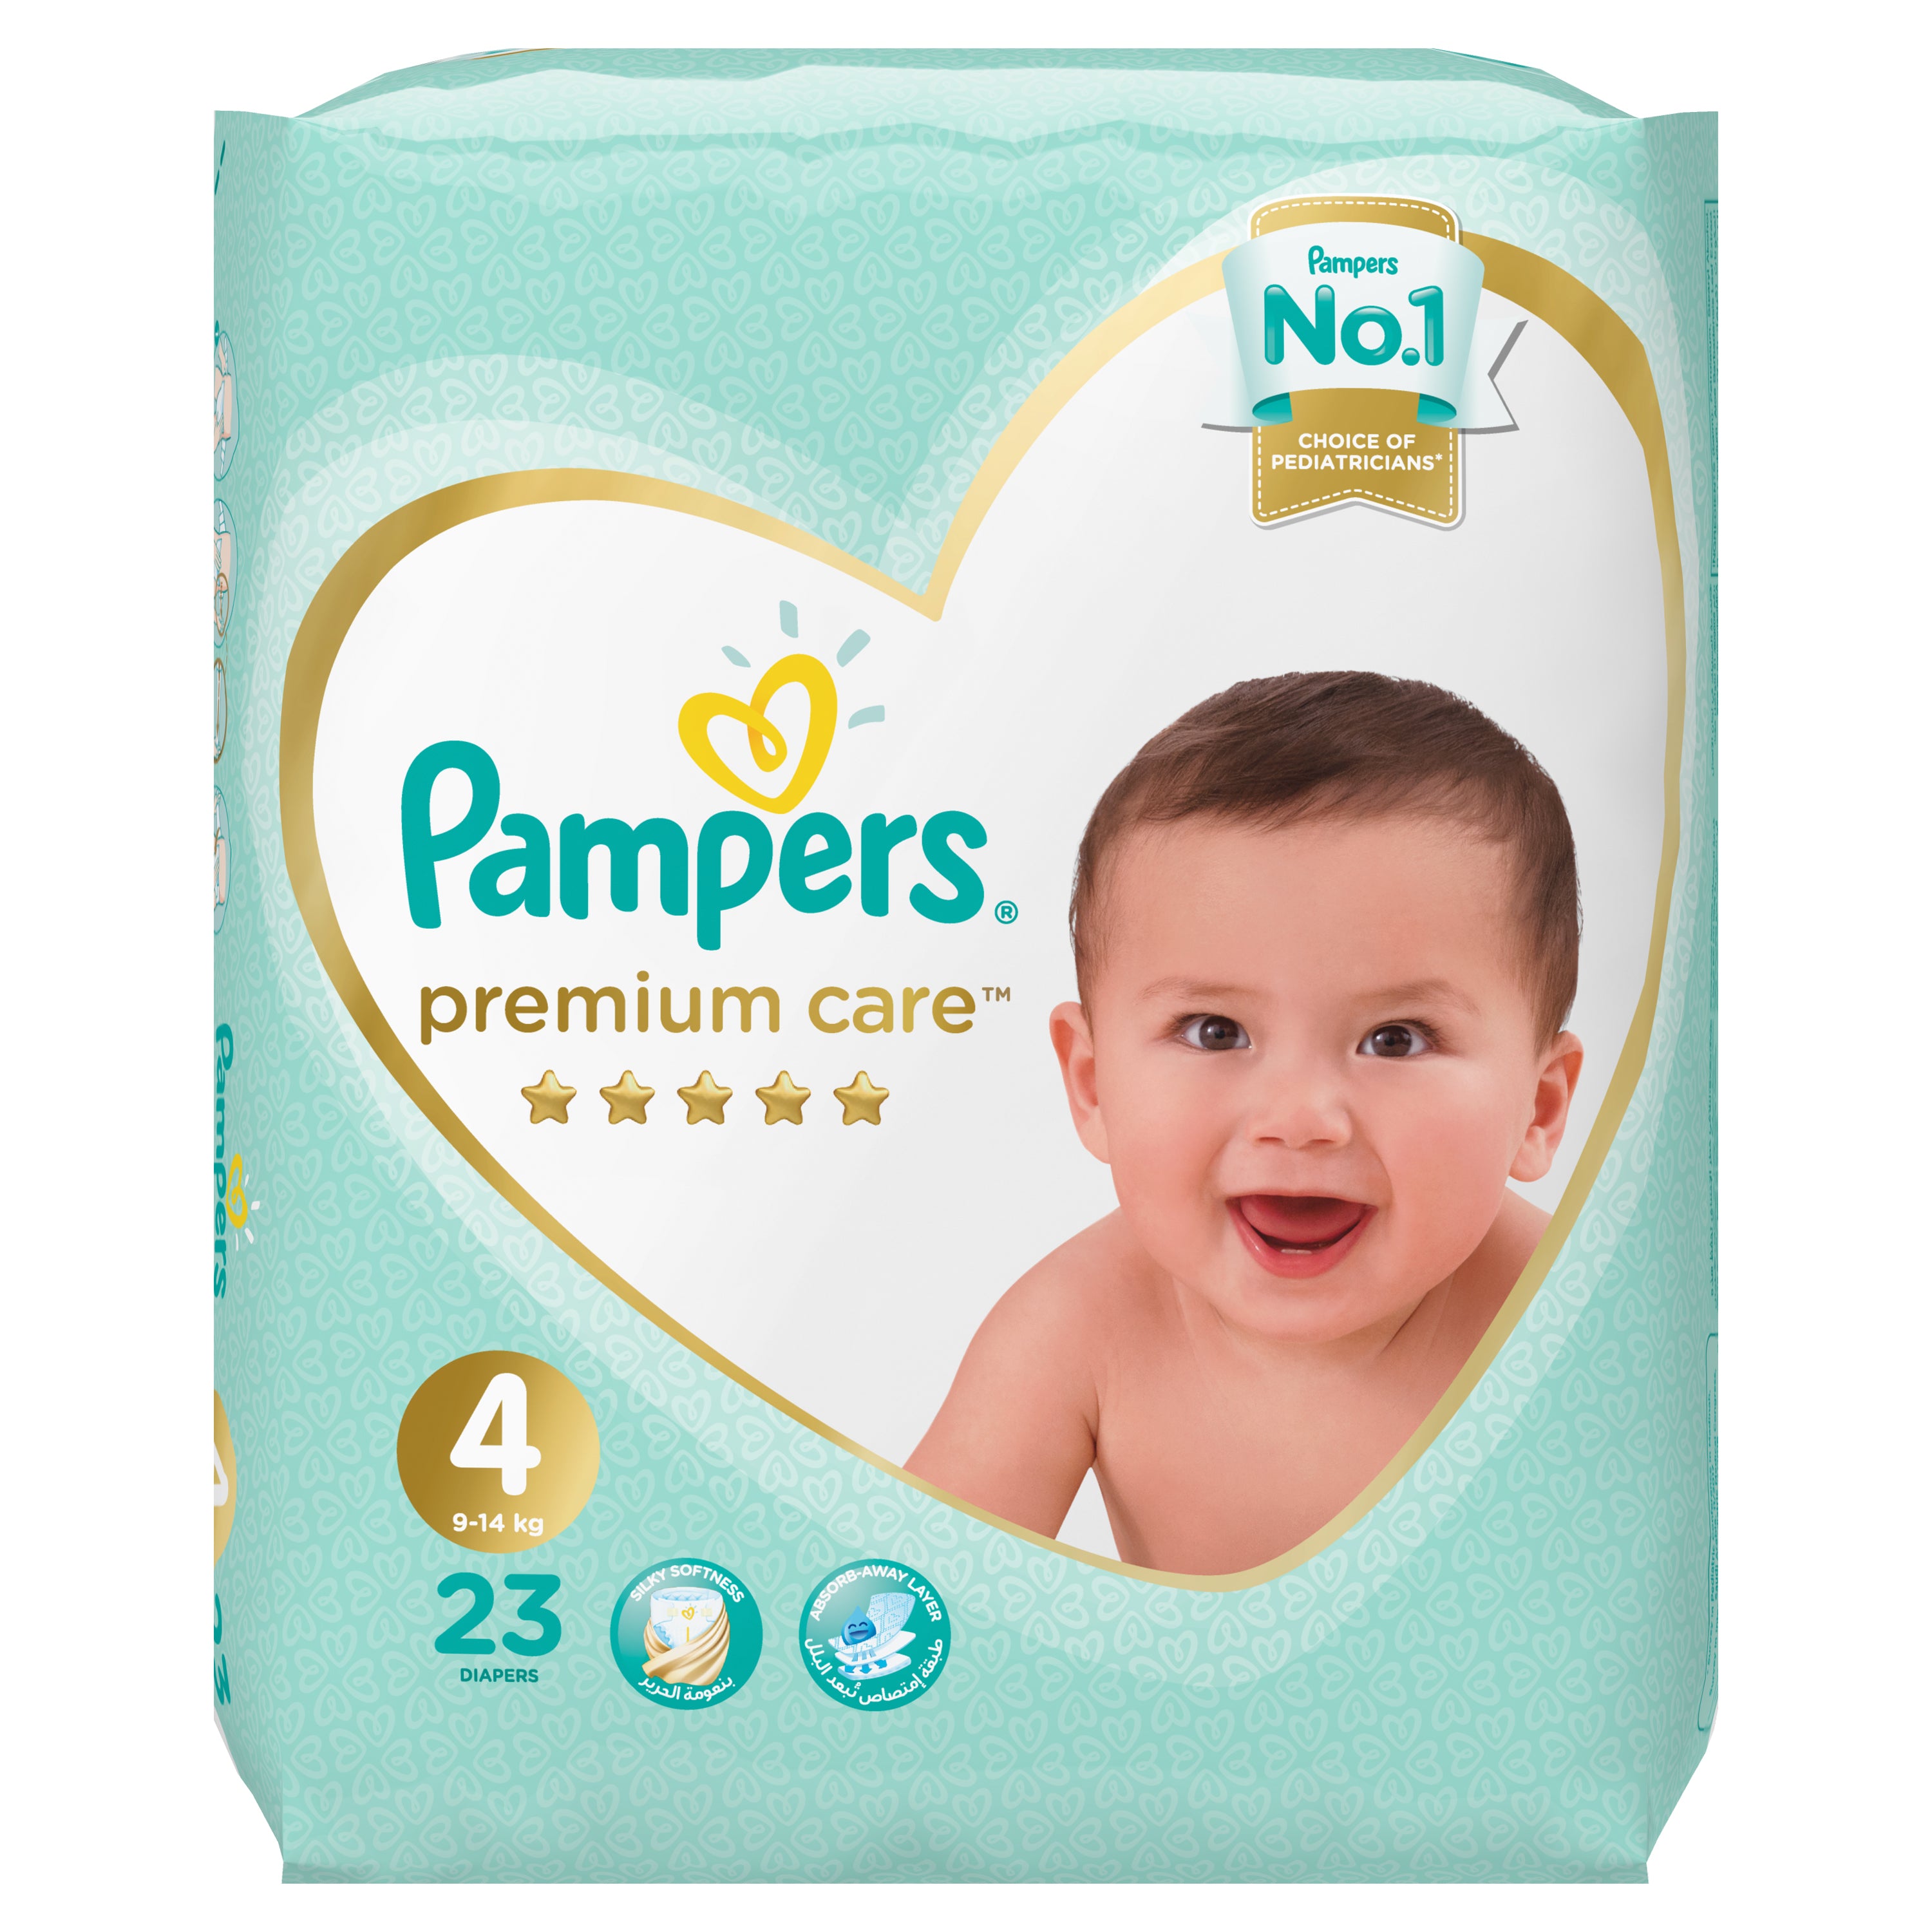 pampers na noc